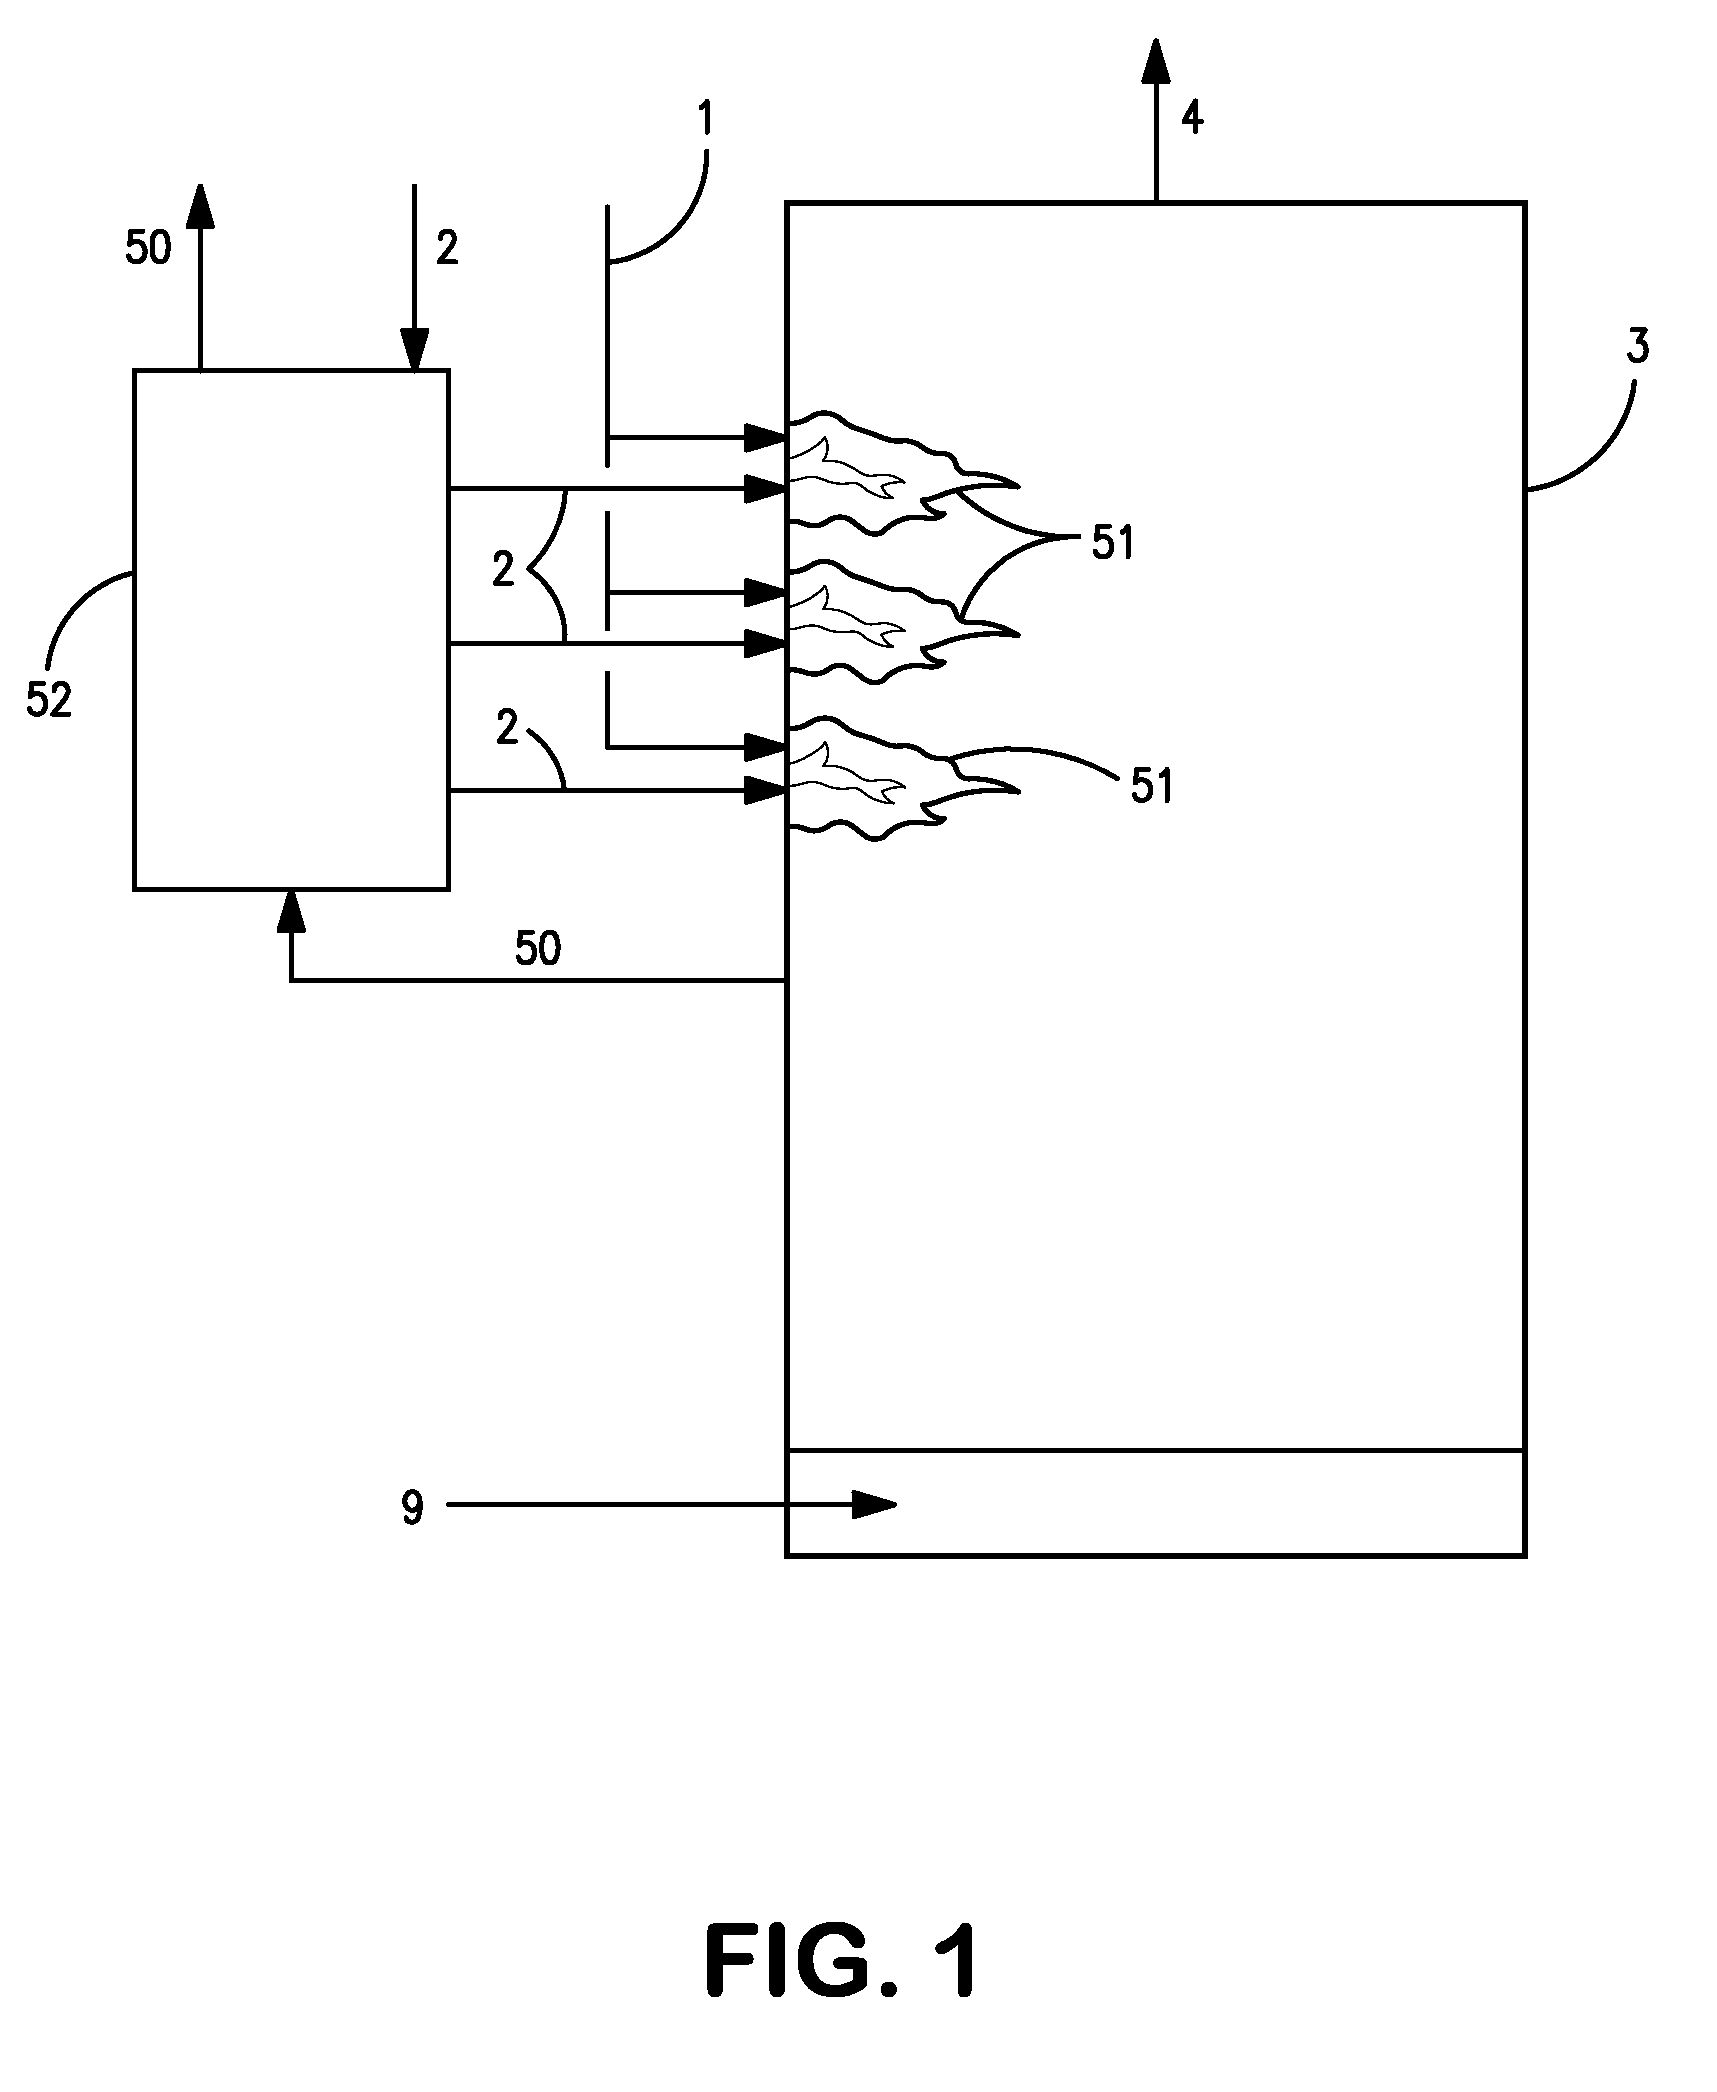 Furnace with multiple heat recovery systems